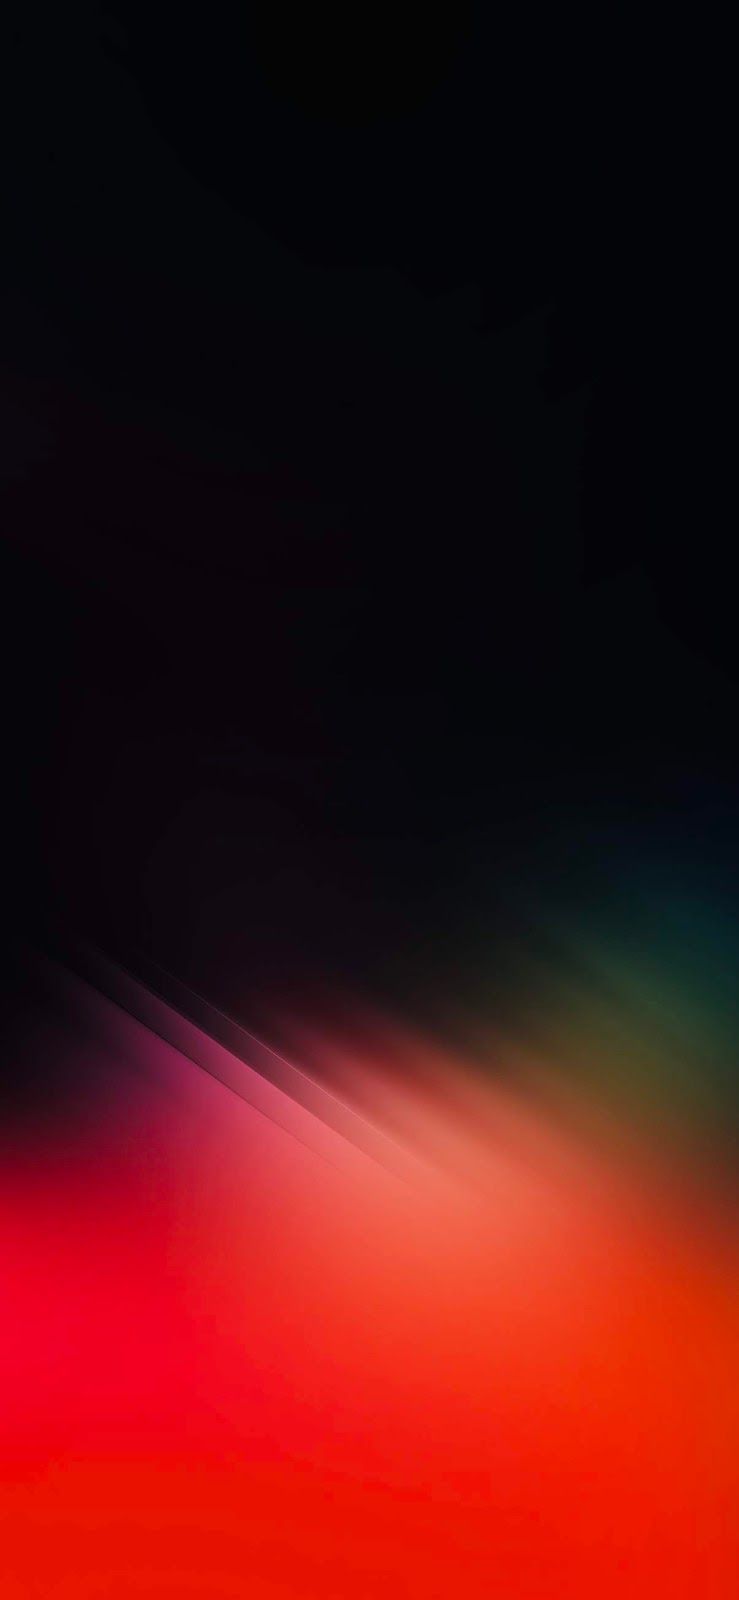 Abstract Fire By Ar72014 - Iphone Xr Wallpaper Red , HD Wallpaper & Backgrounds